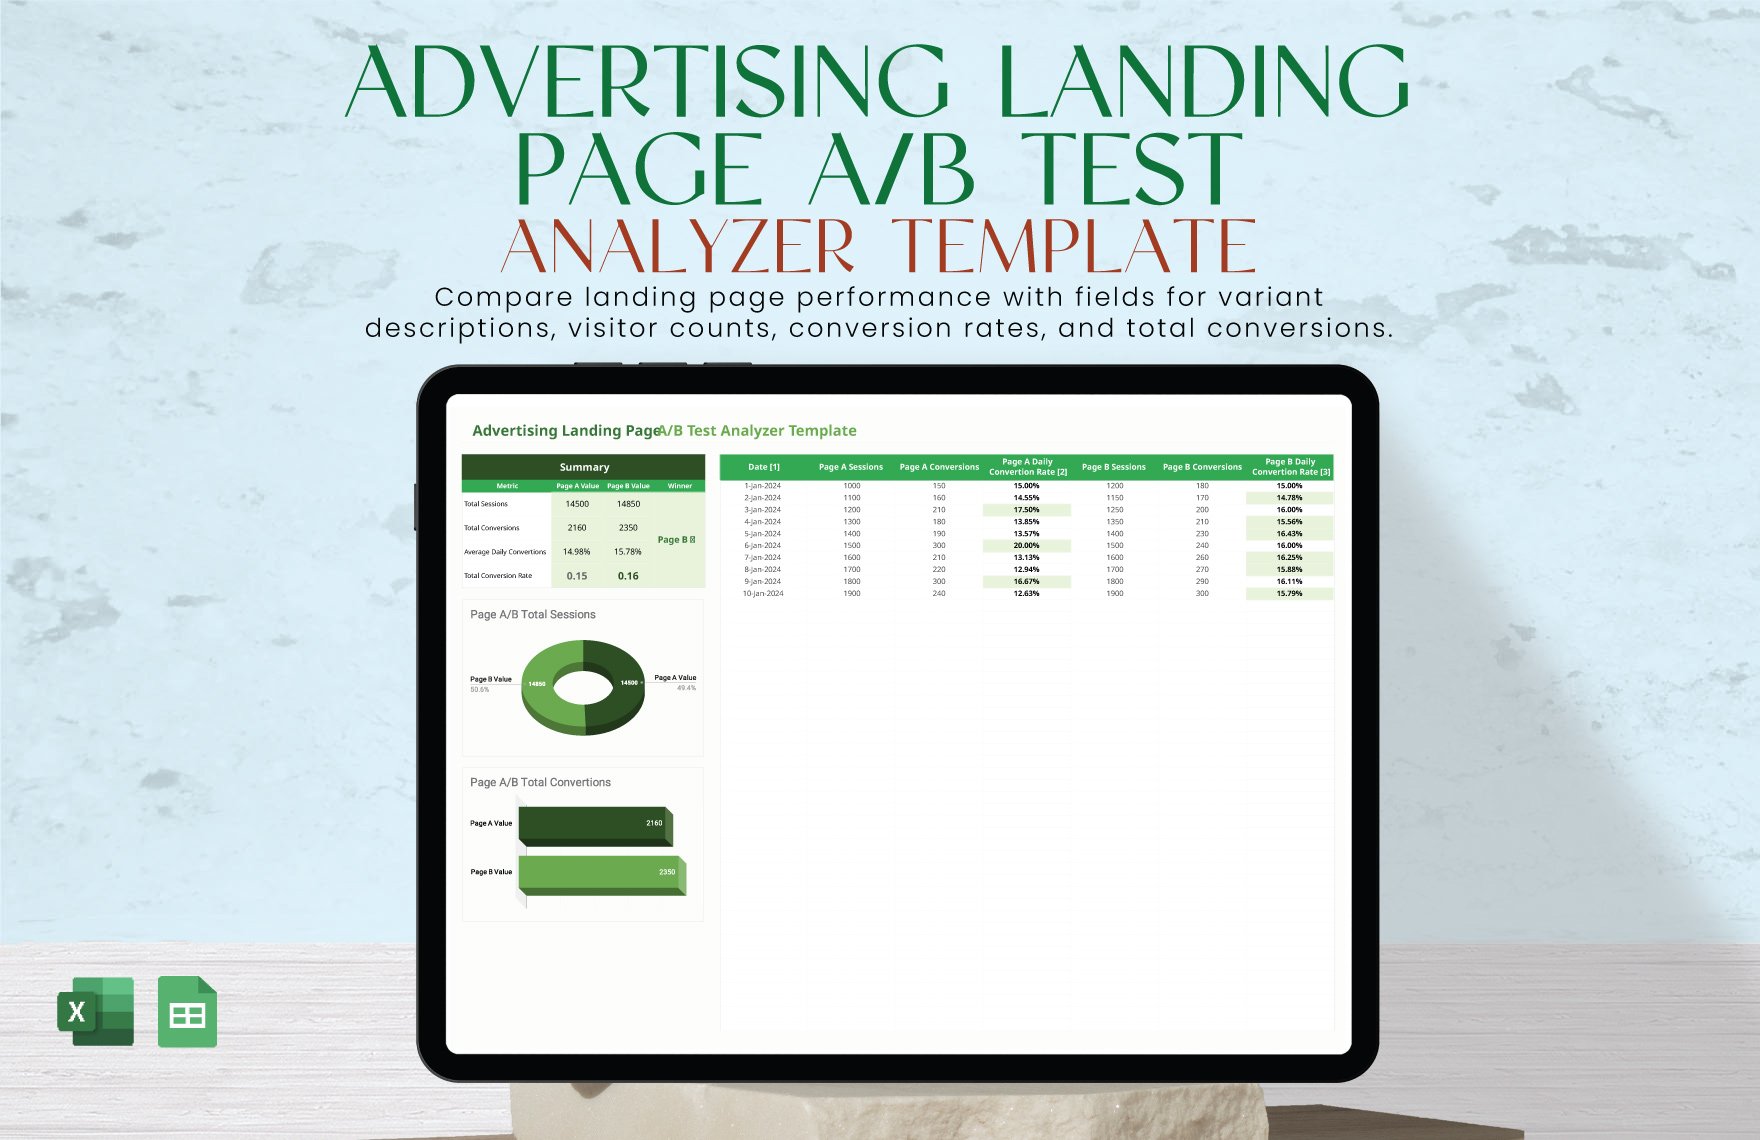 Advertising Landing Page A/B Test Analyzer Template in Excel, Google Sheets